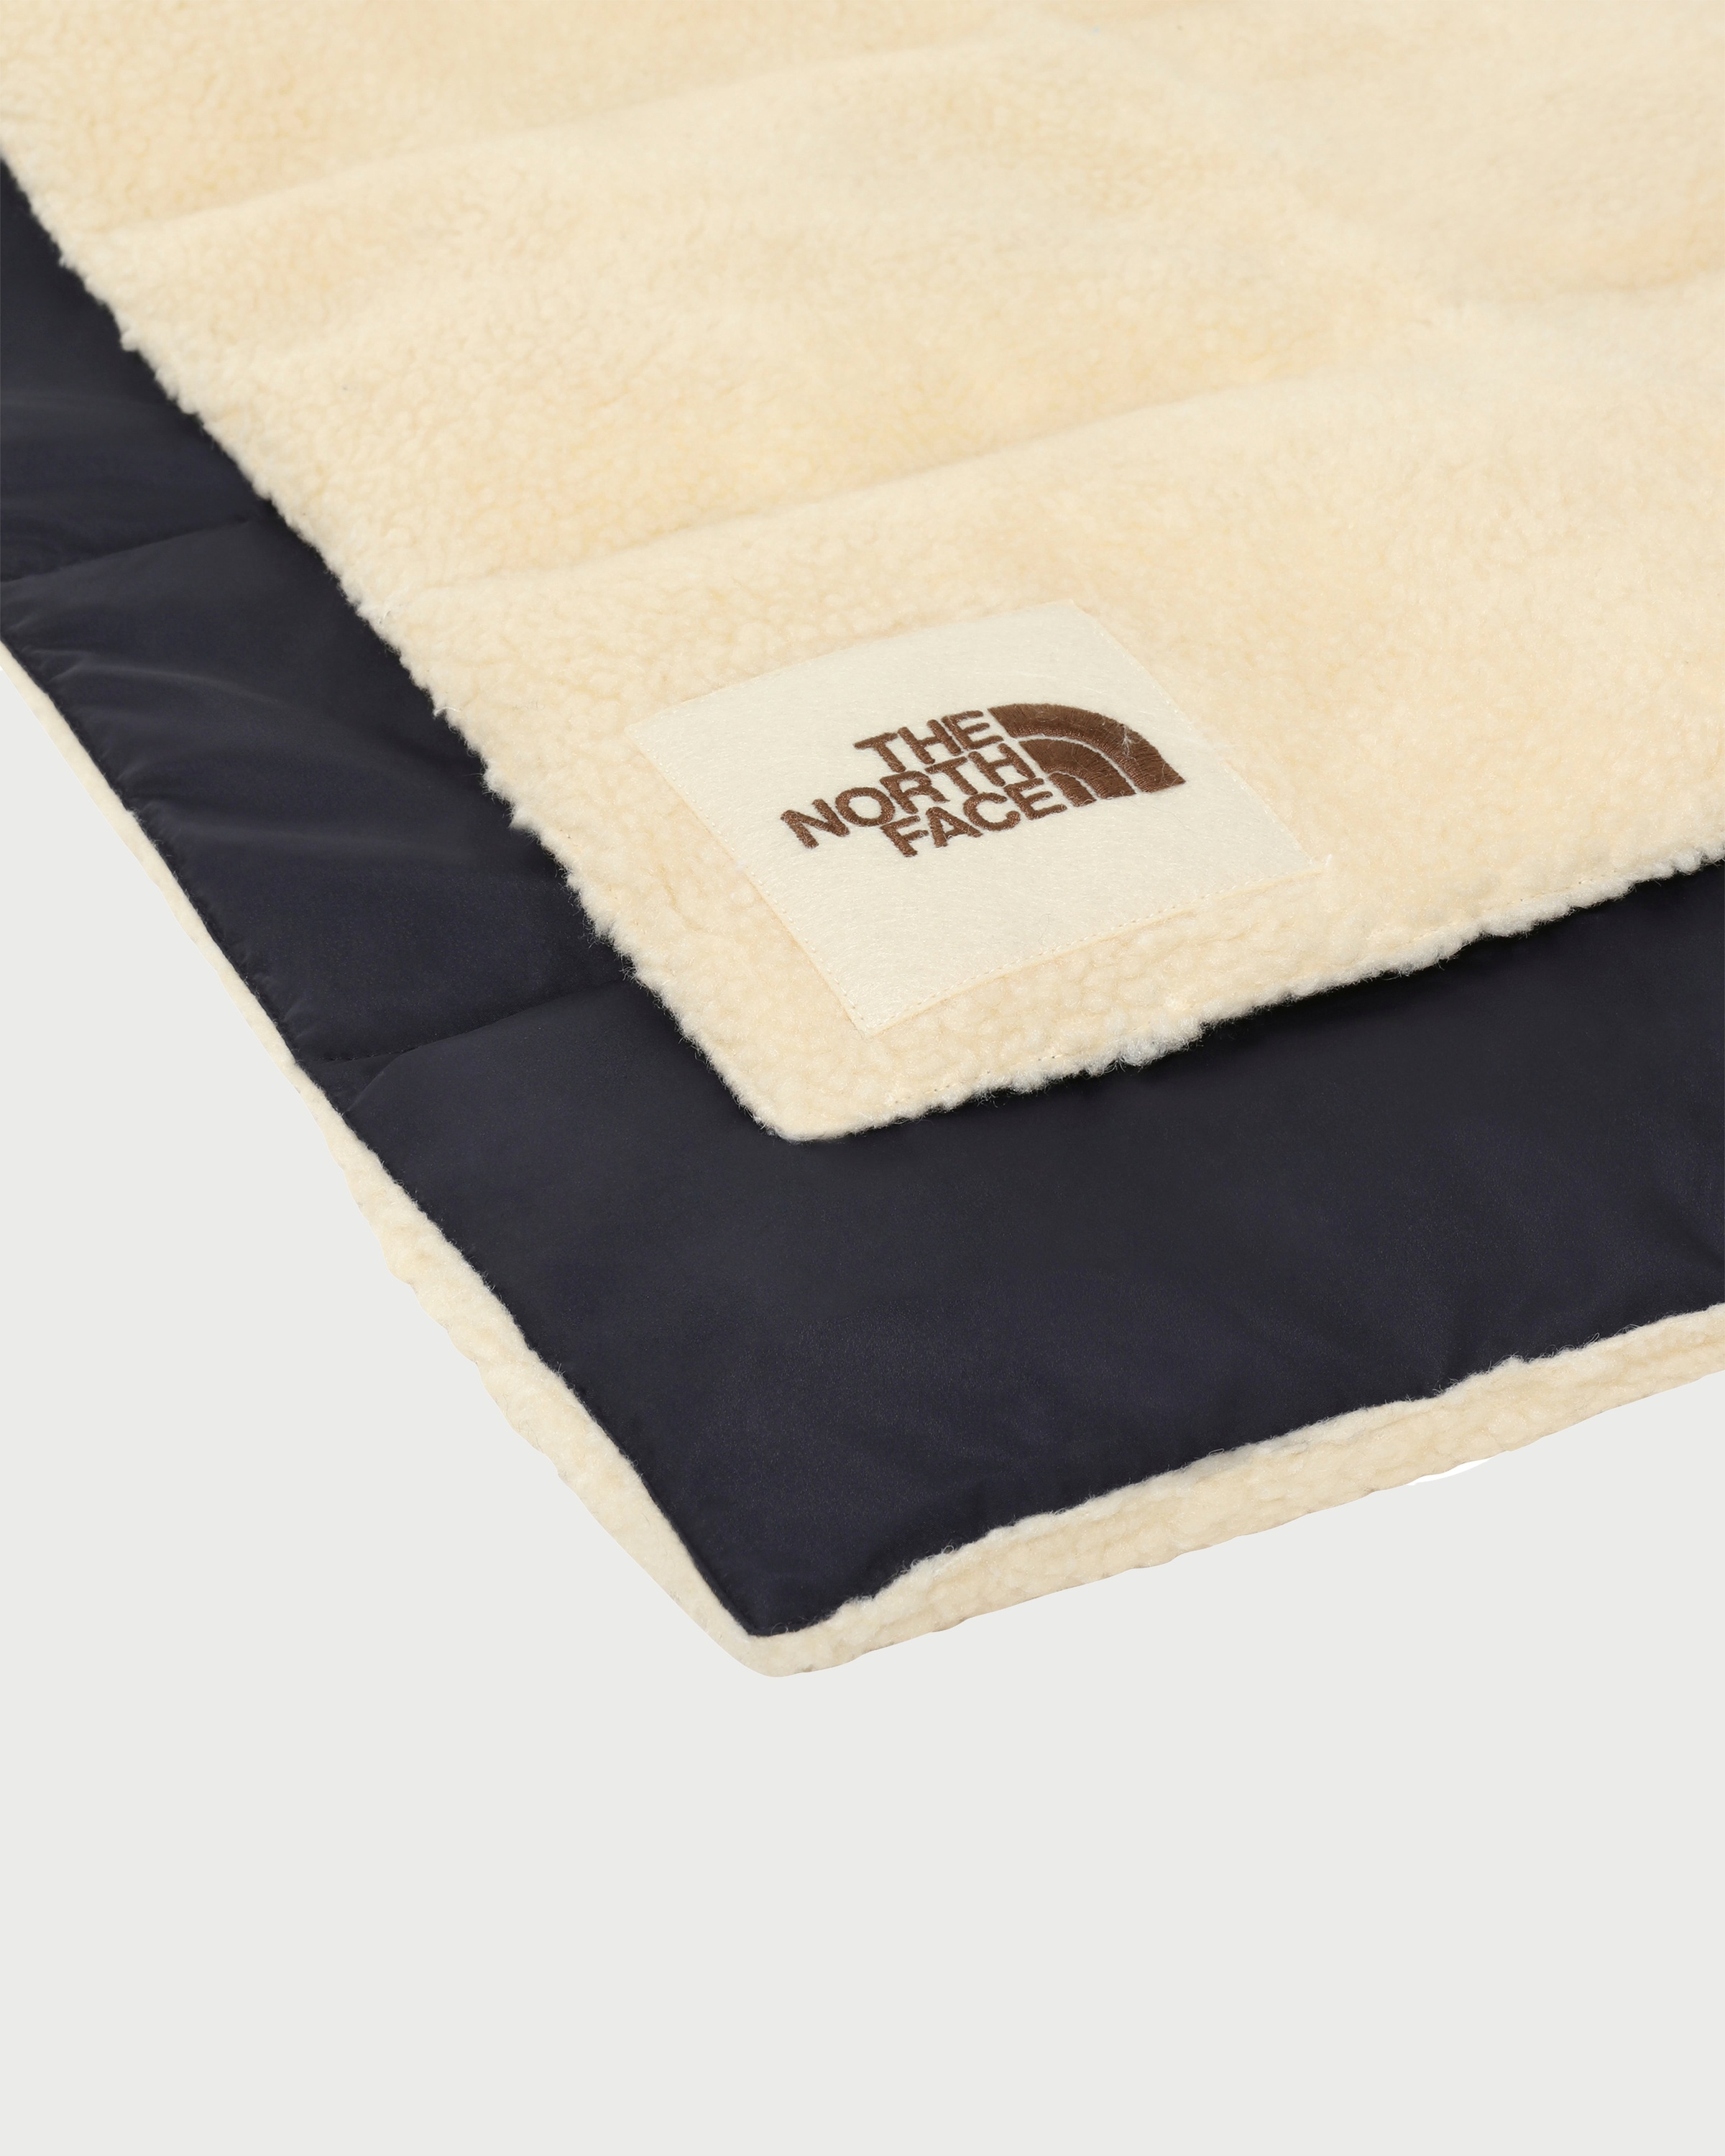 The North Face – Brown Label Insulated Scarf Bleached Sand Unisex - Knits - Yellow - Image 2